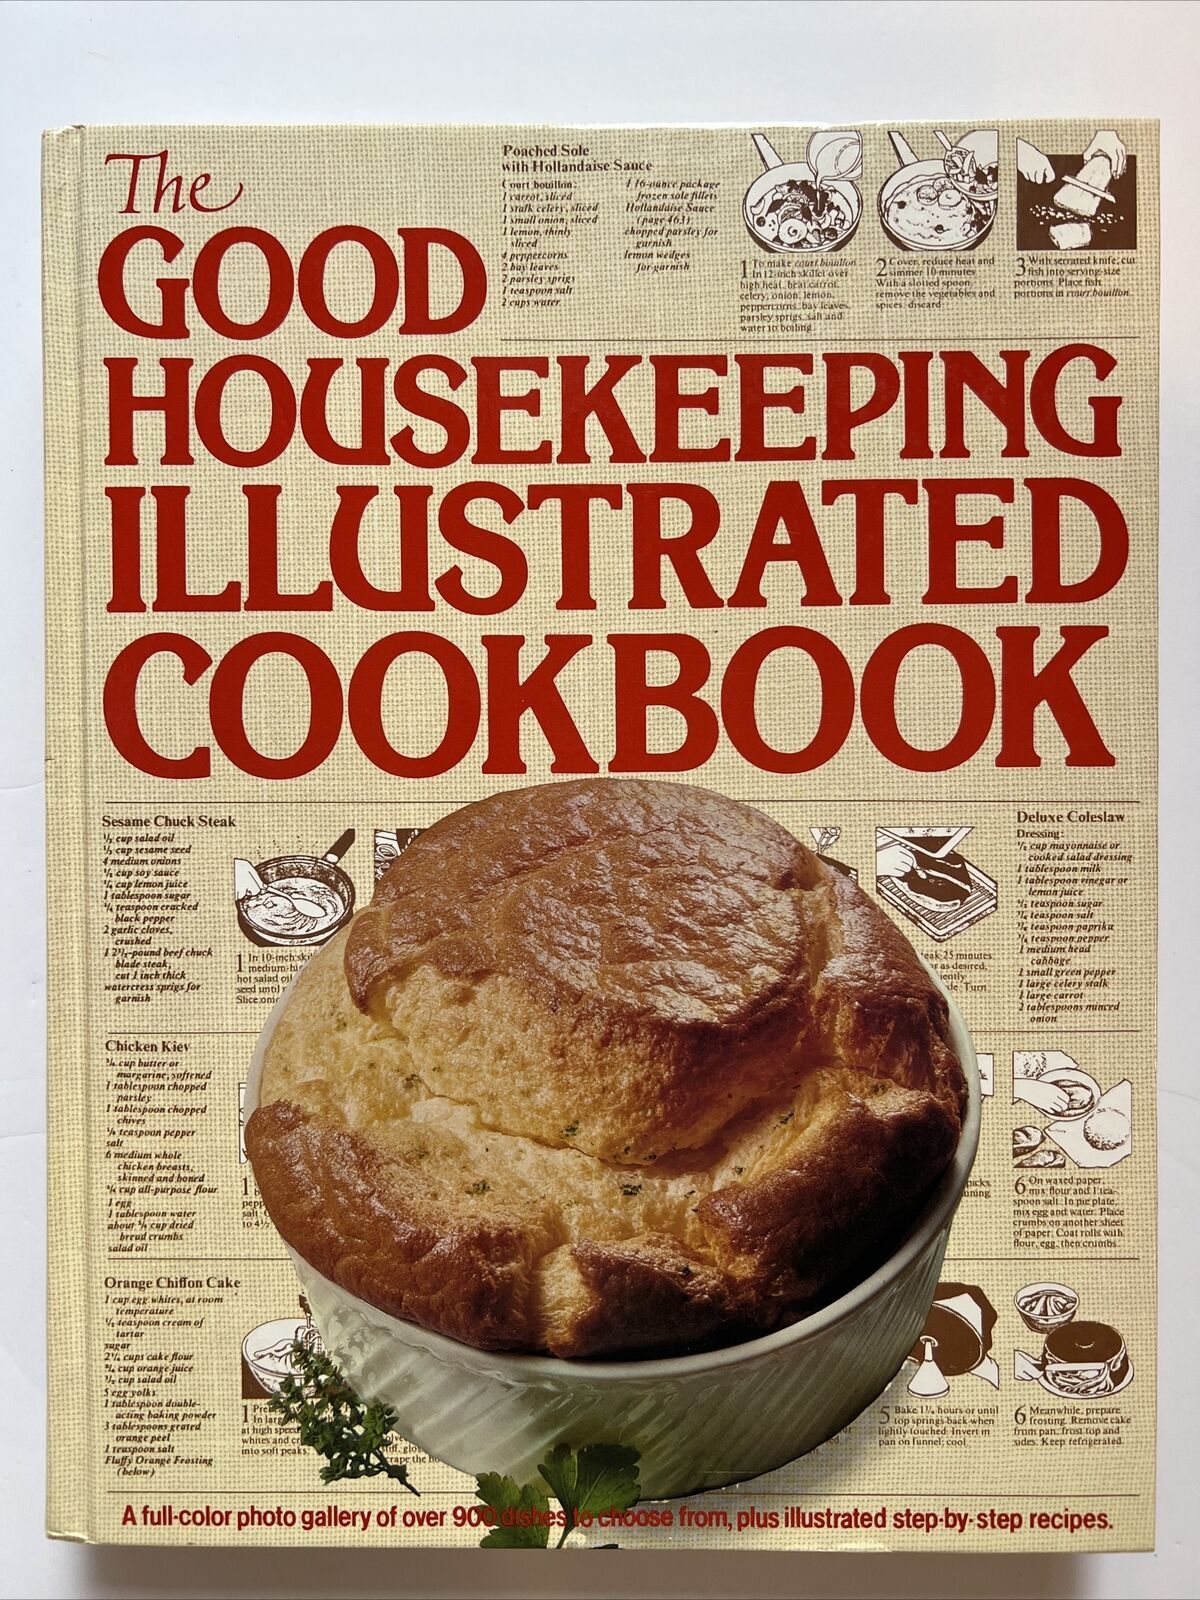 The Good Housekeeping Illustrated Cookbook cover